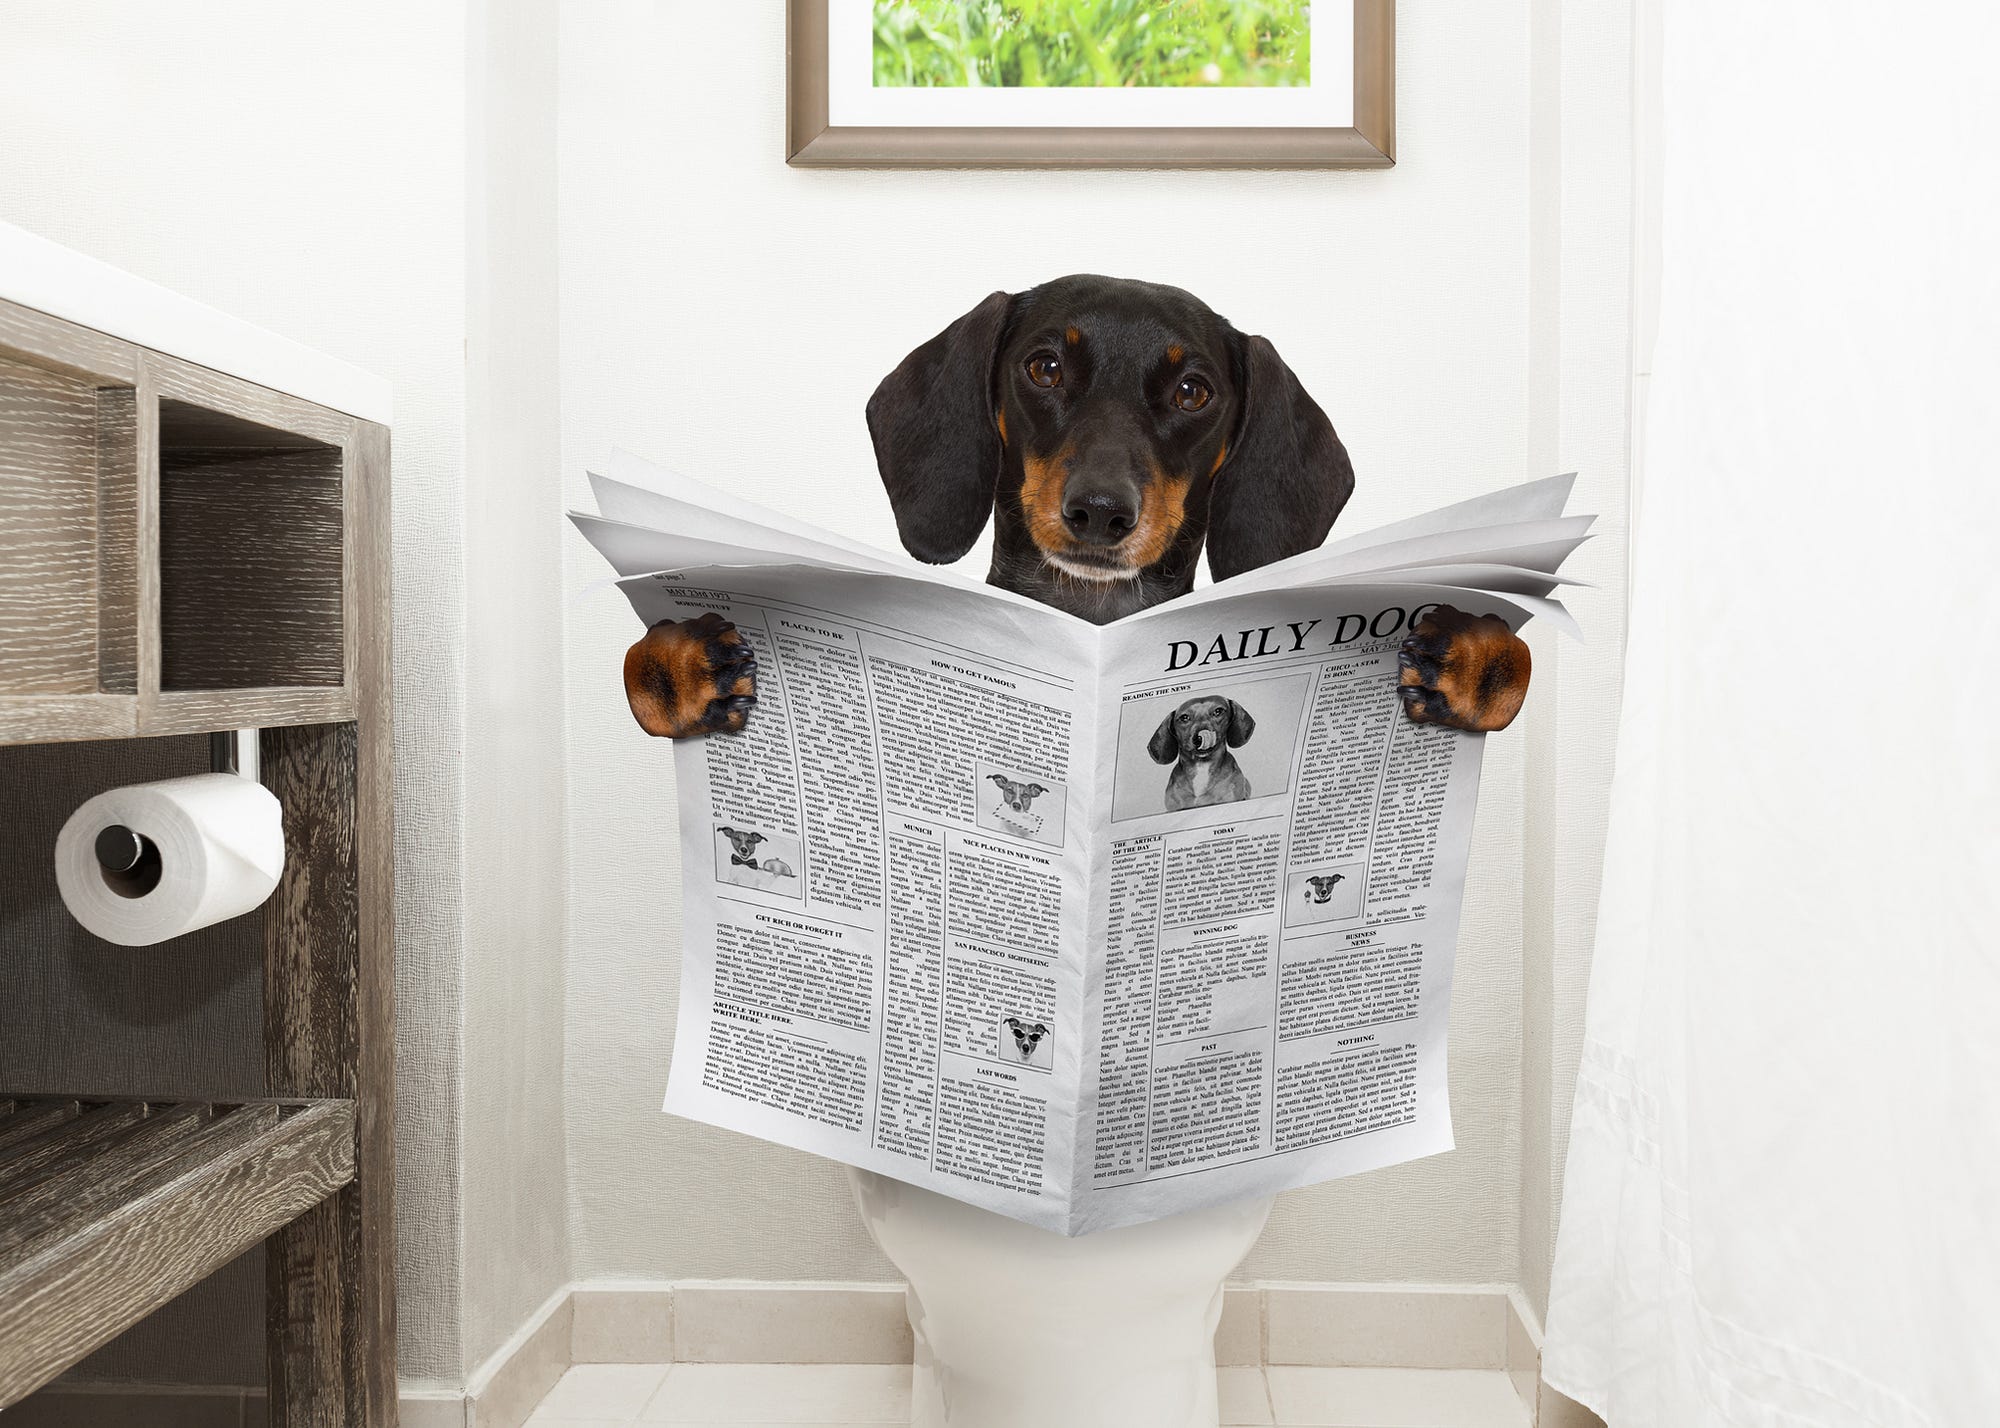 Don't Flush Your Pets Poo Down The Loo, Vet Warns